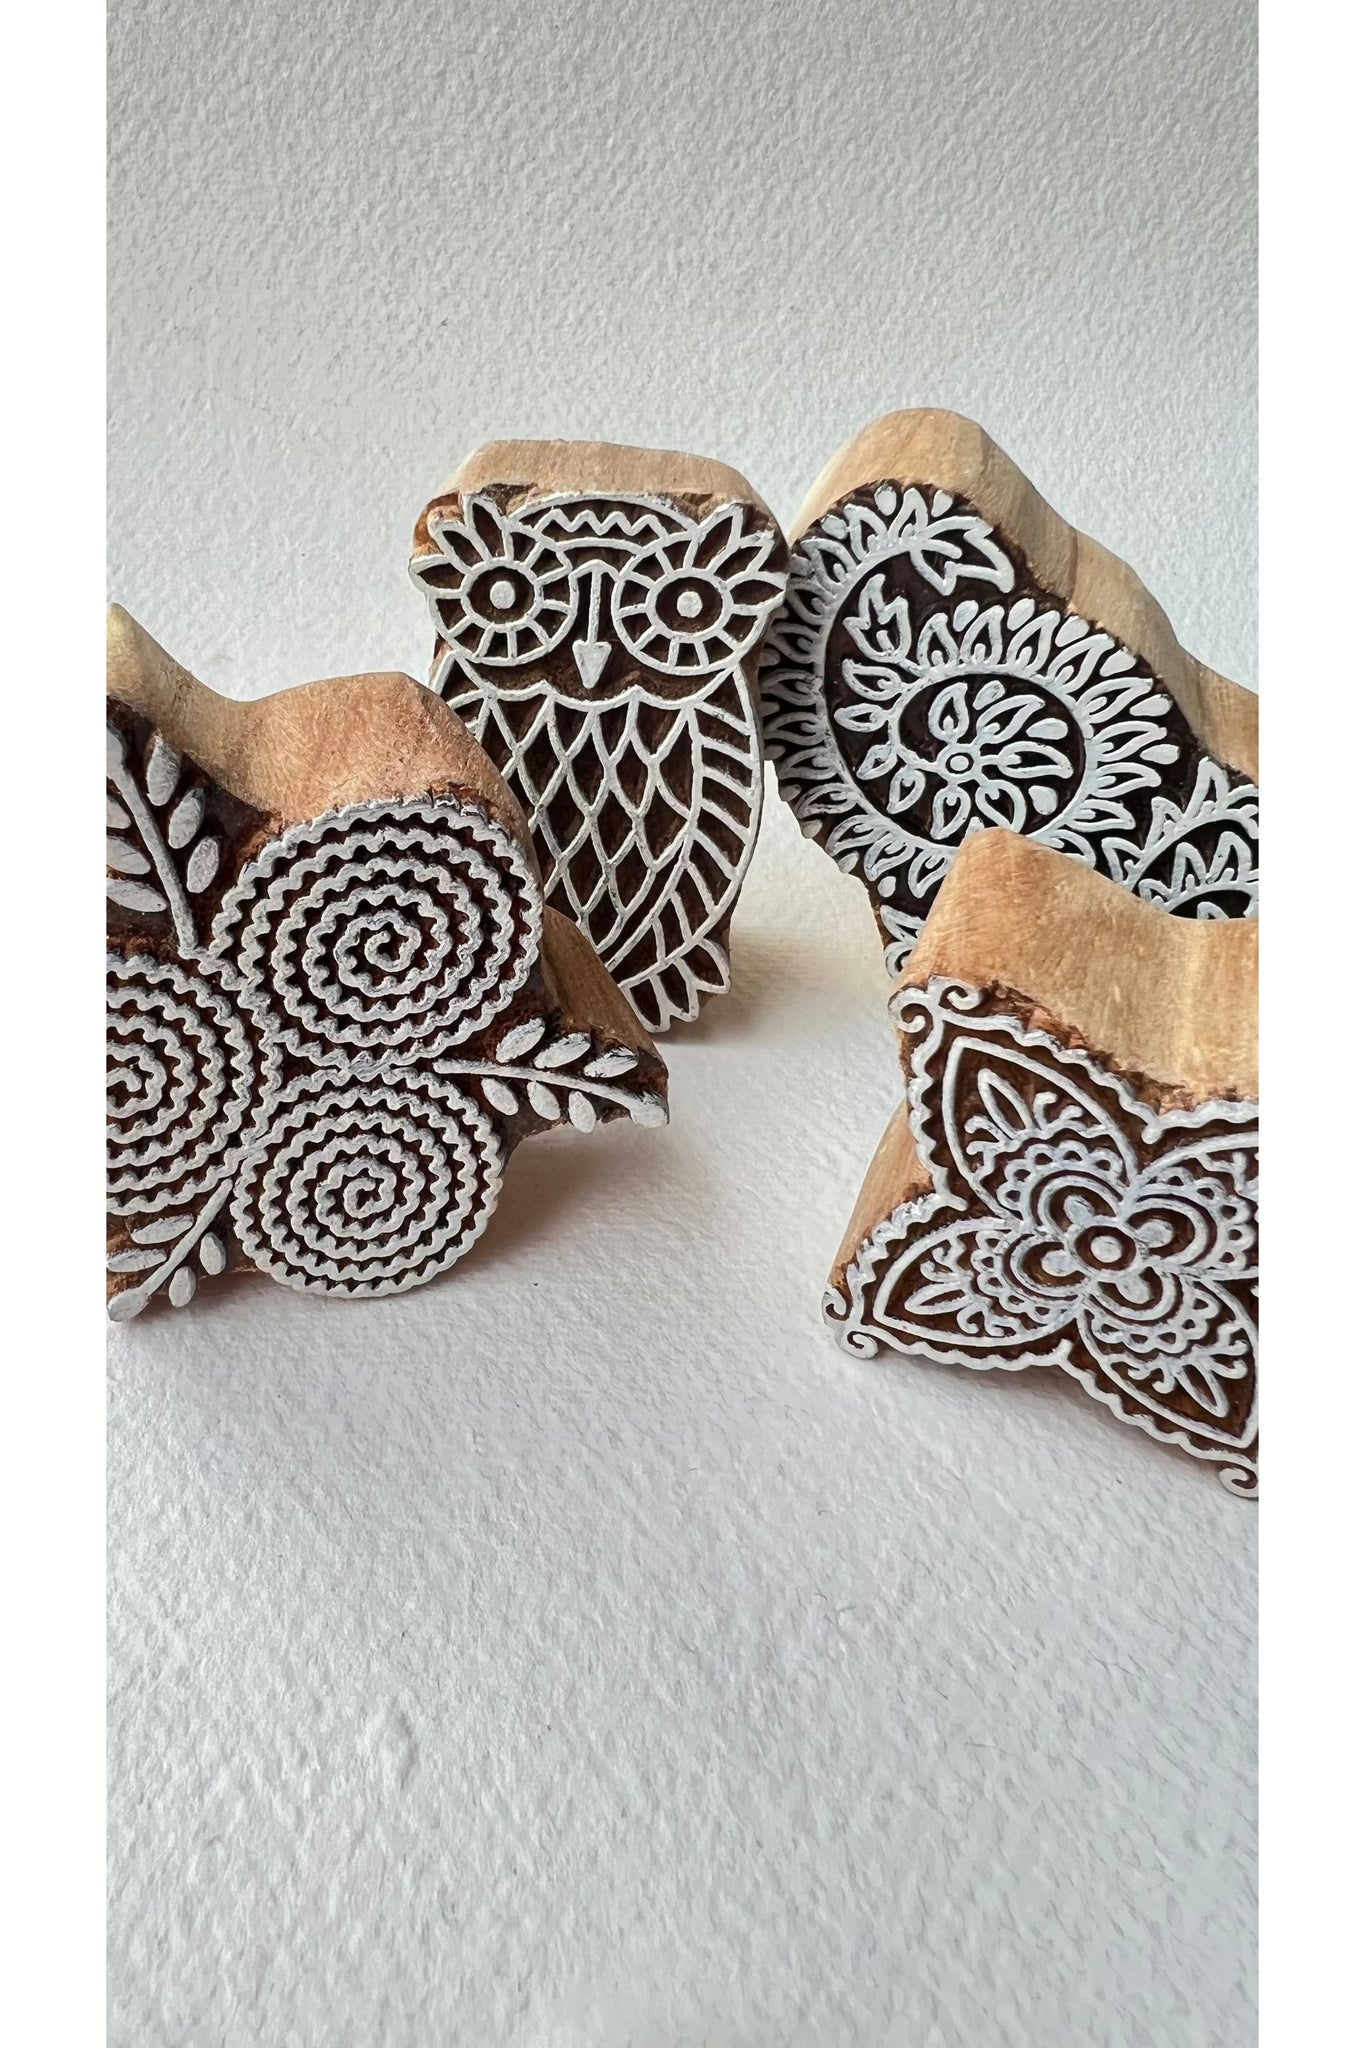 Indian Carved Wooden Blocks Majestic Hudson Lifestyle Experiences Home Decor